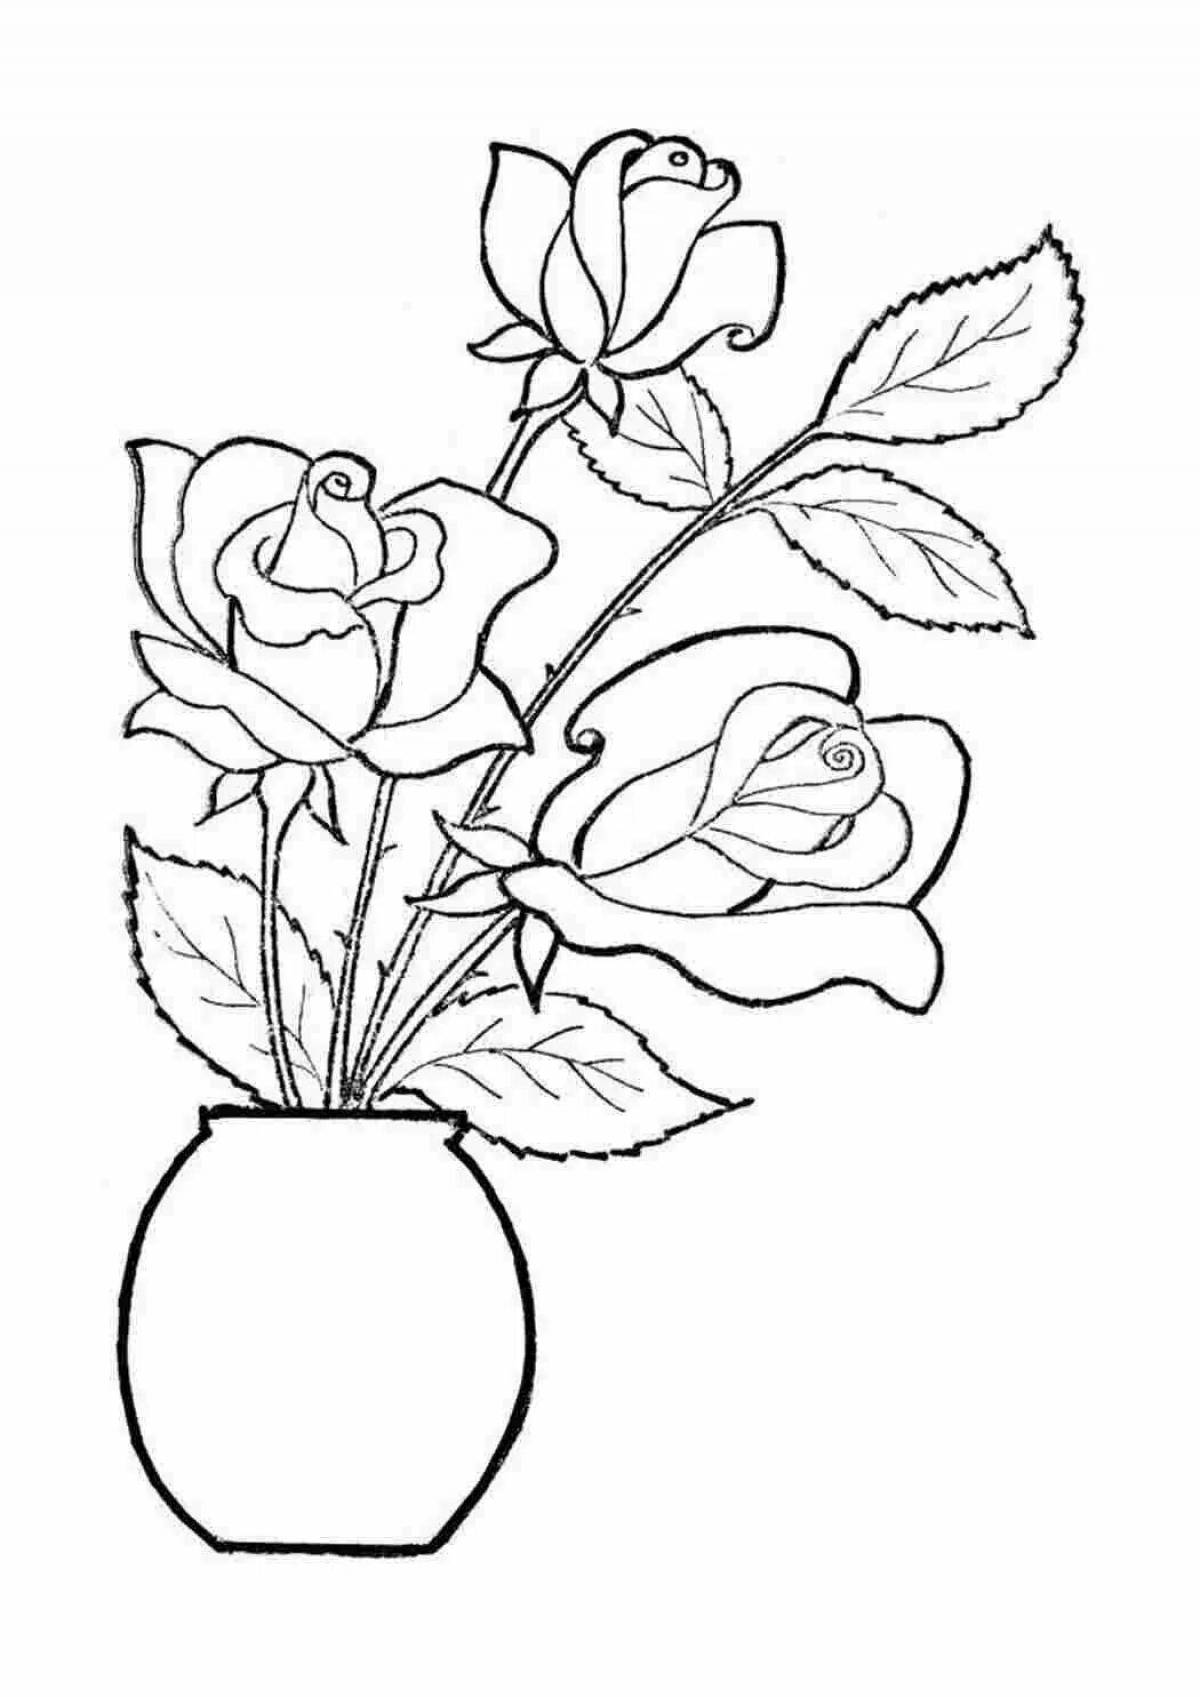 Adorable flower coloring for mom